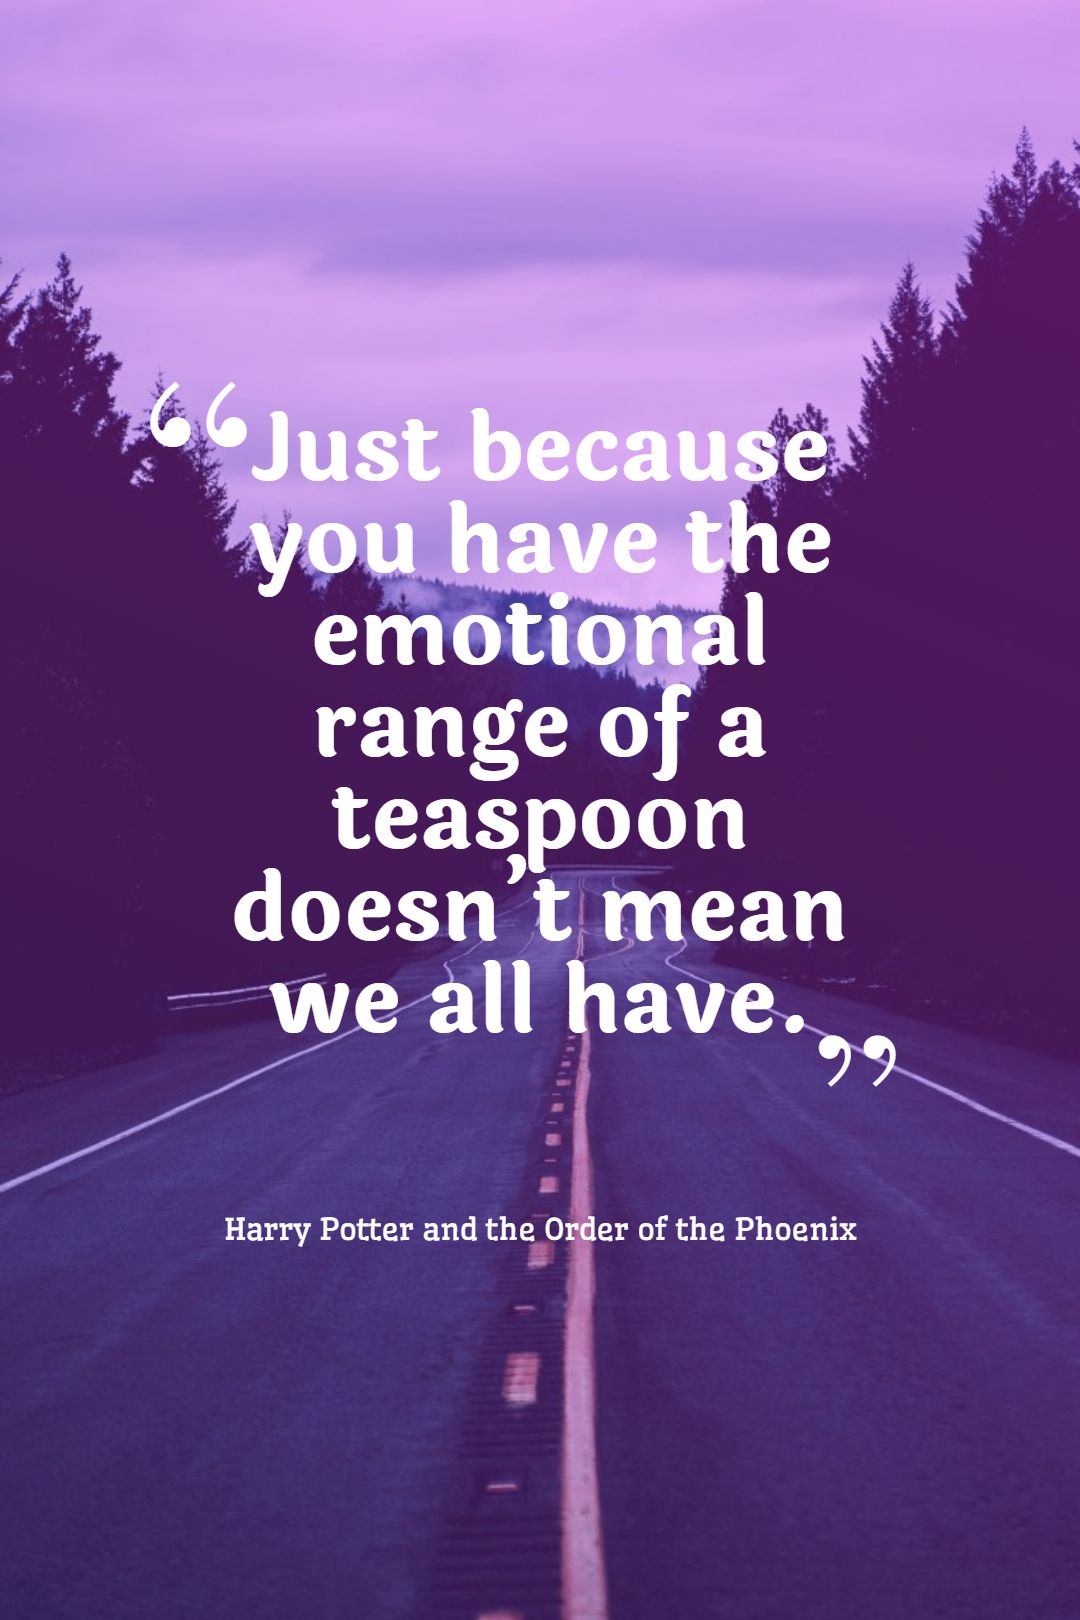 Just because you have the emotional range of a teaspoon doesn’t mean we all have.